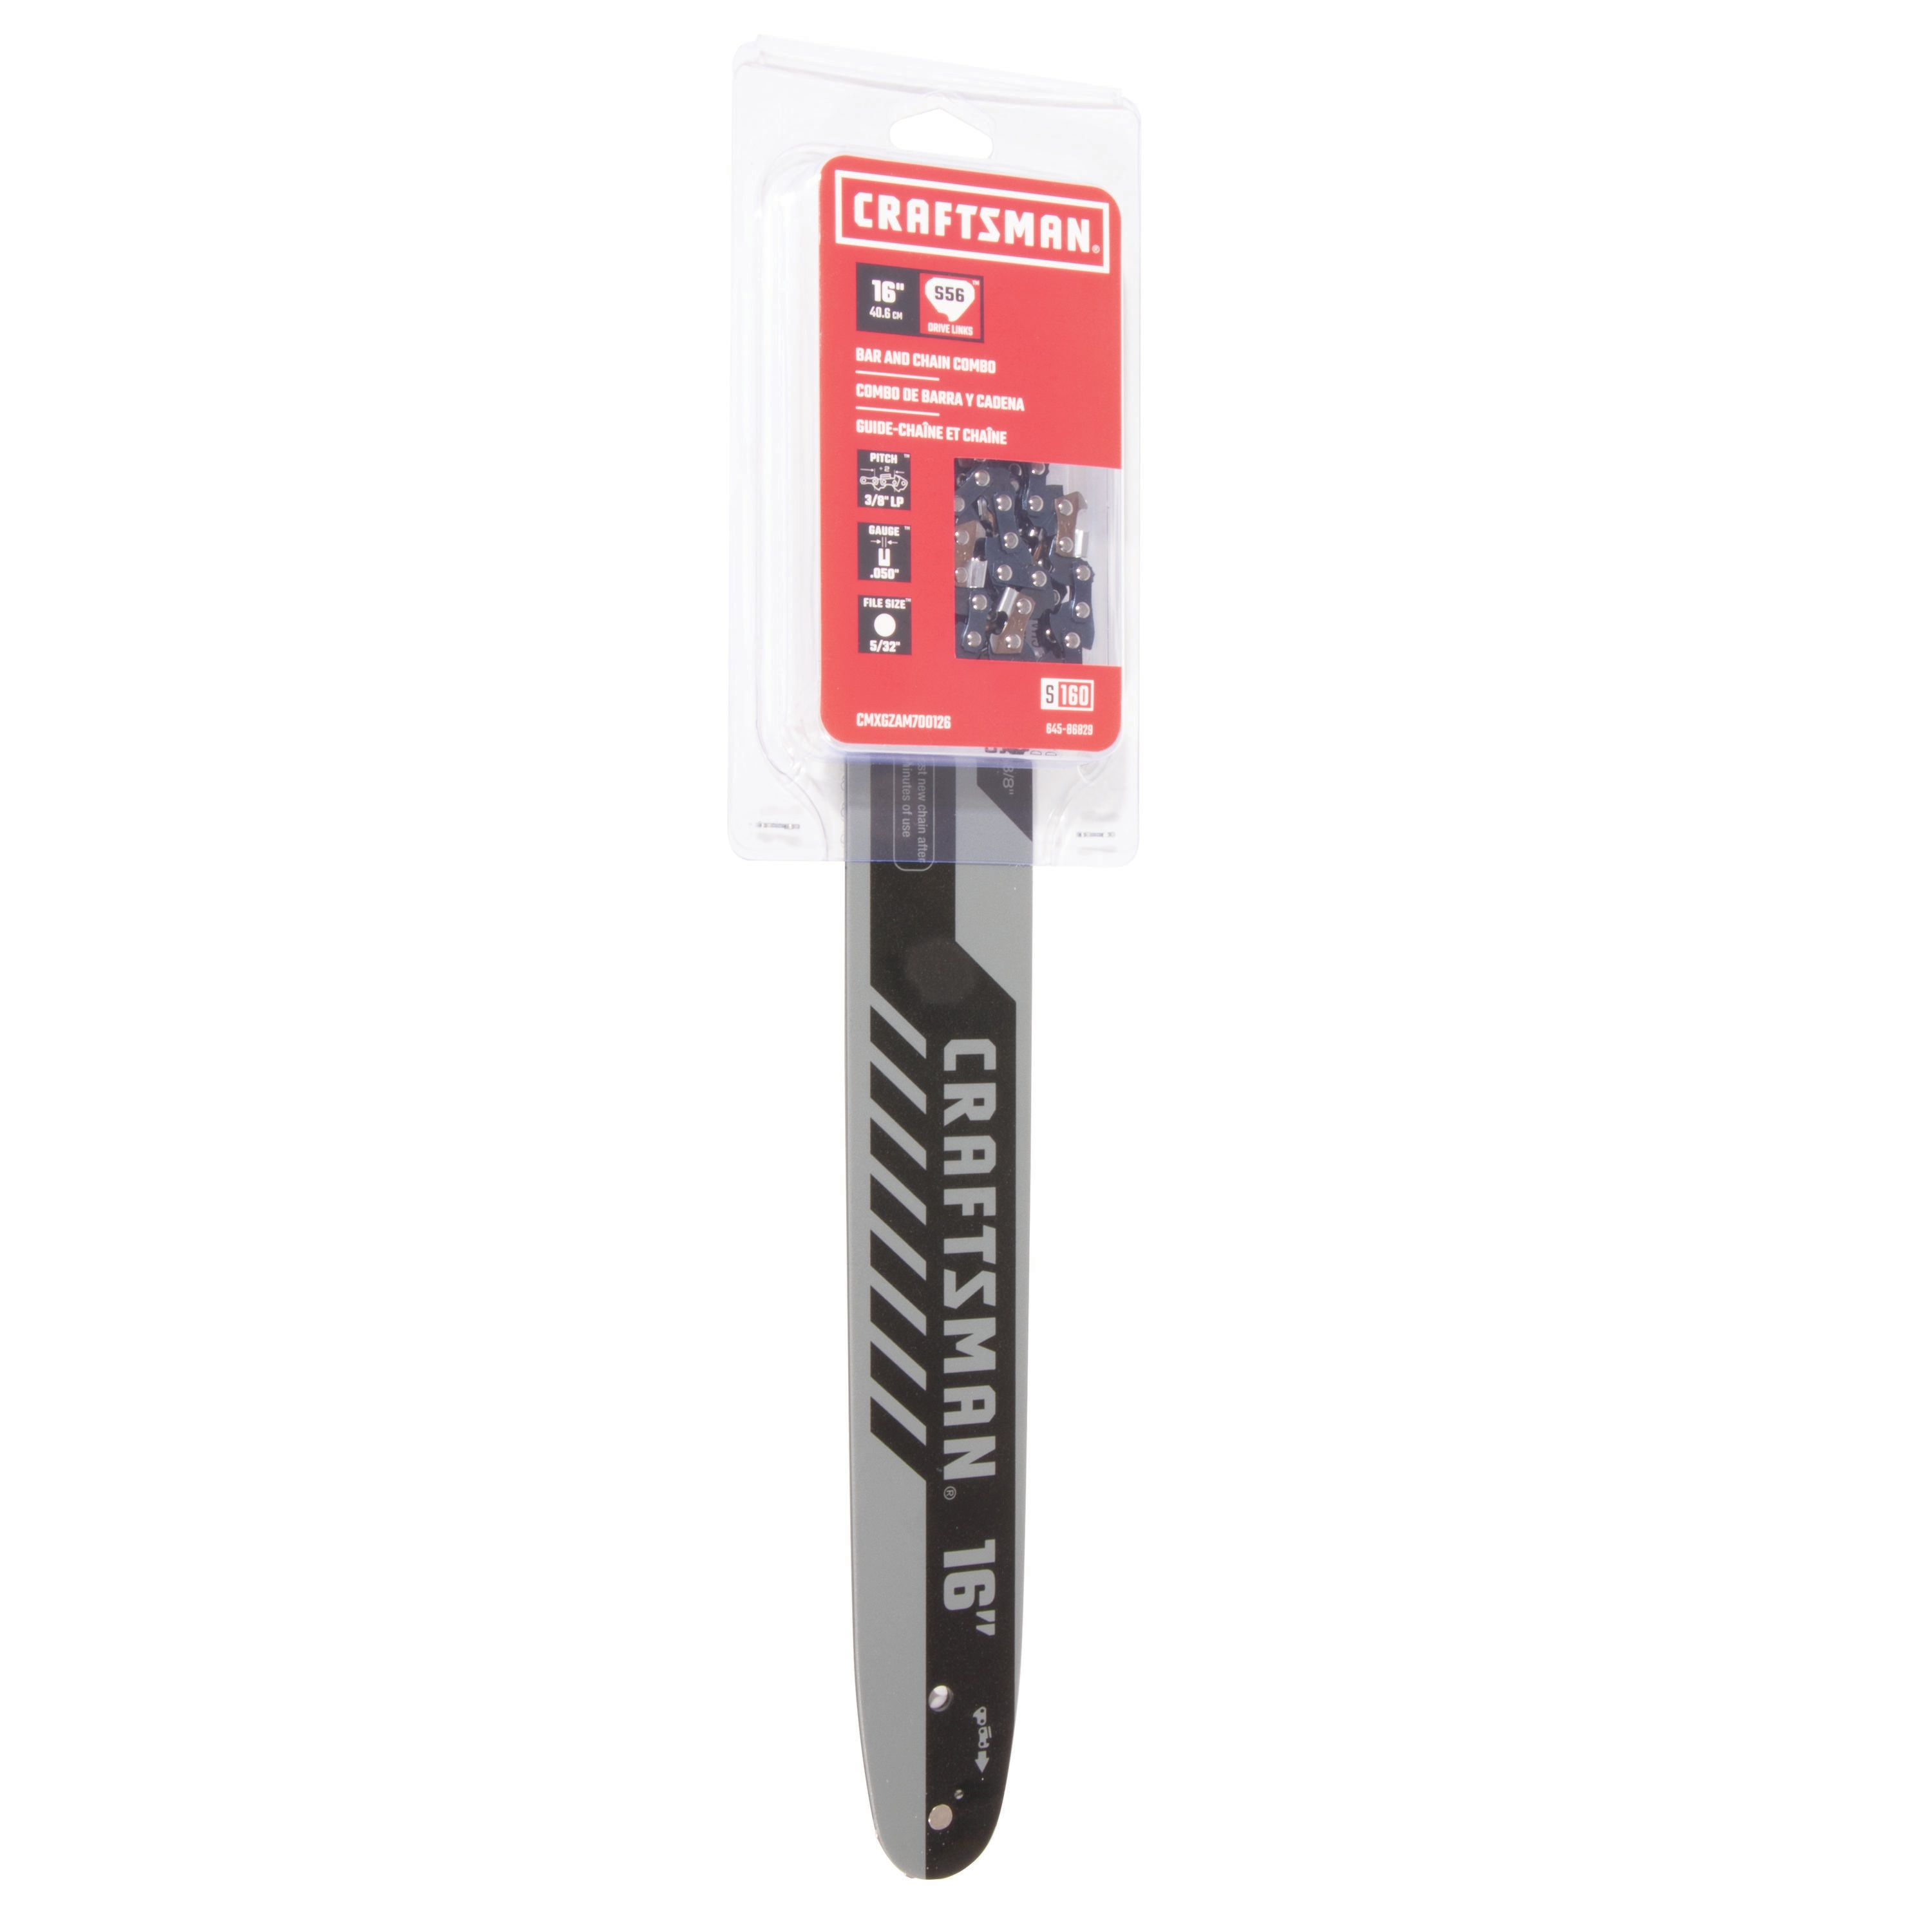 Craftsman Chainsaw Bar and Chain, 16 in, $10.07 and 18 in, $12.57 Clearance so YMMV at Lowes